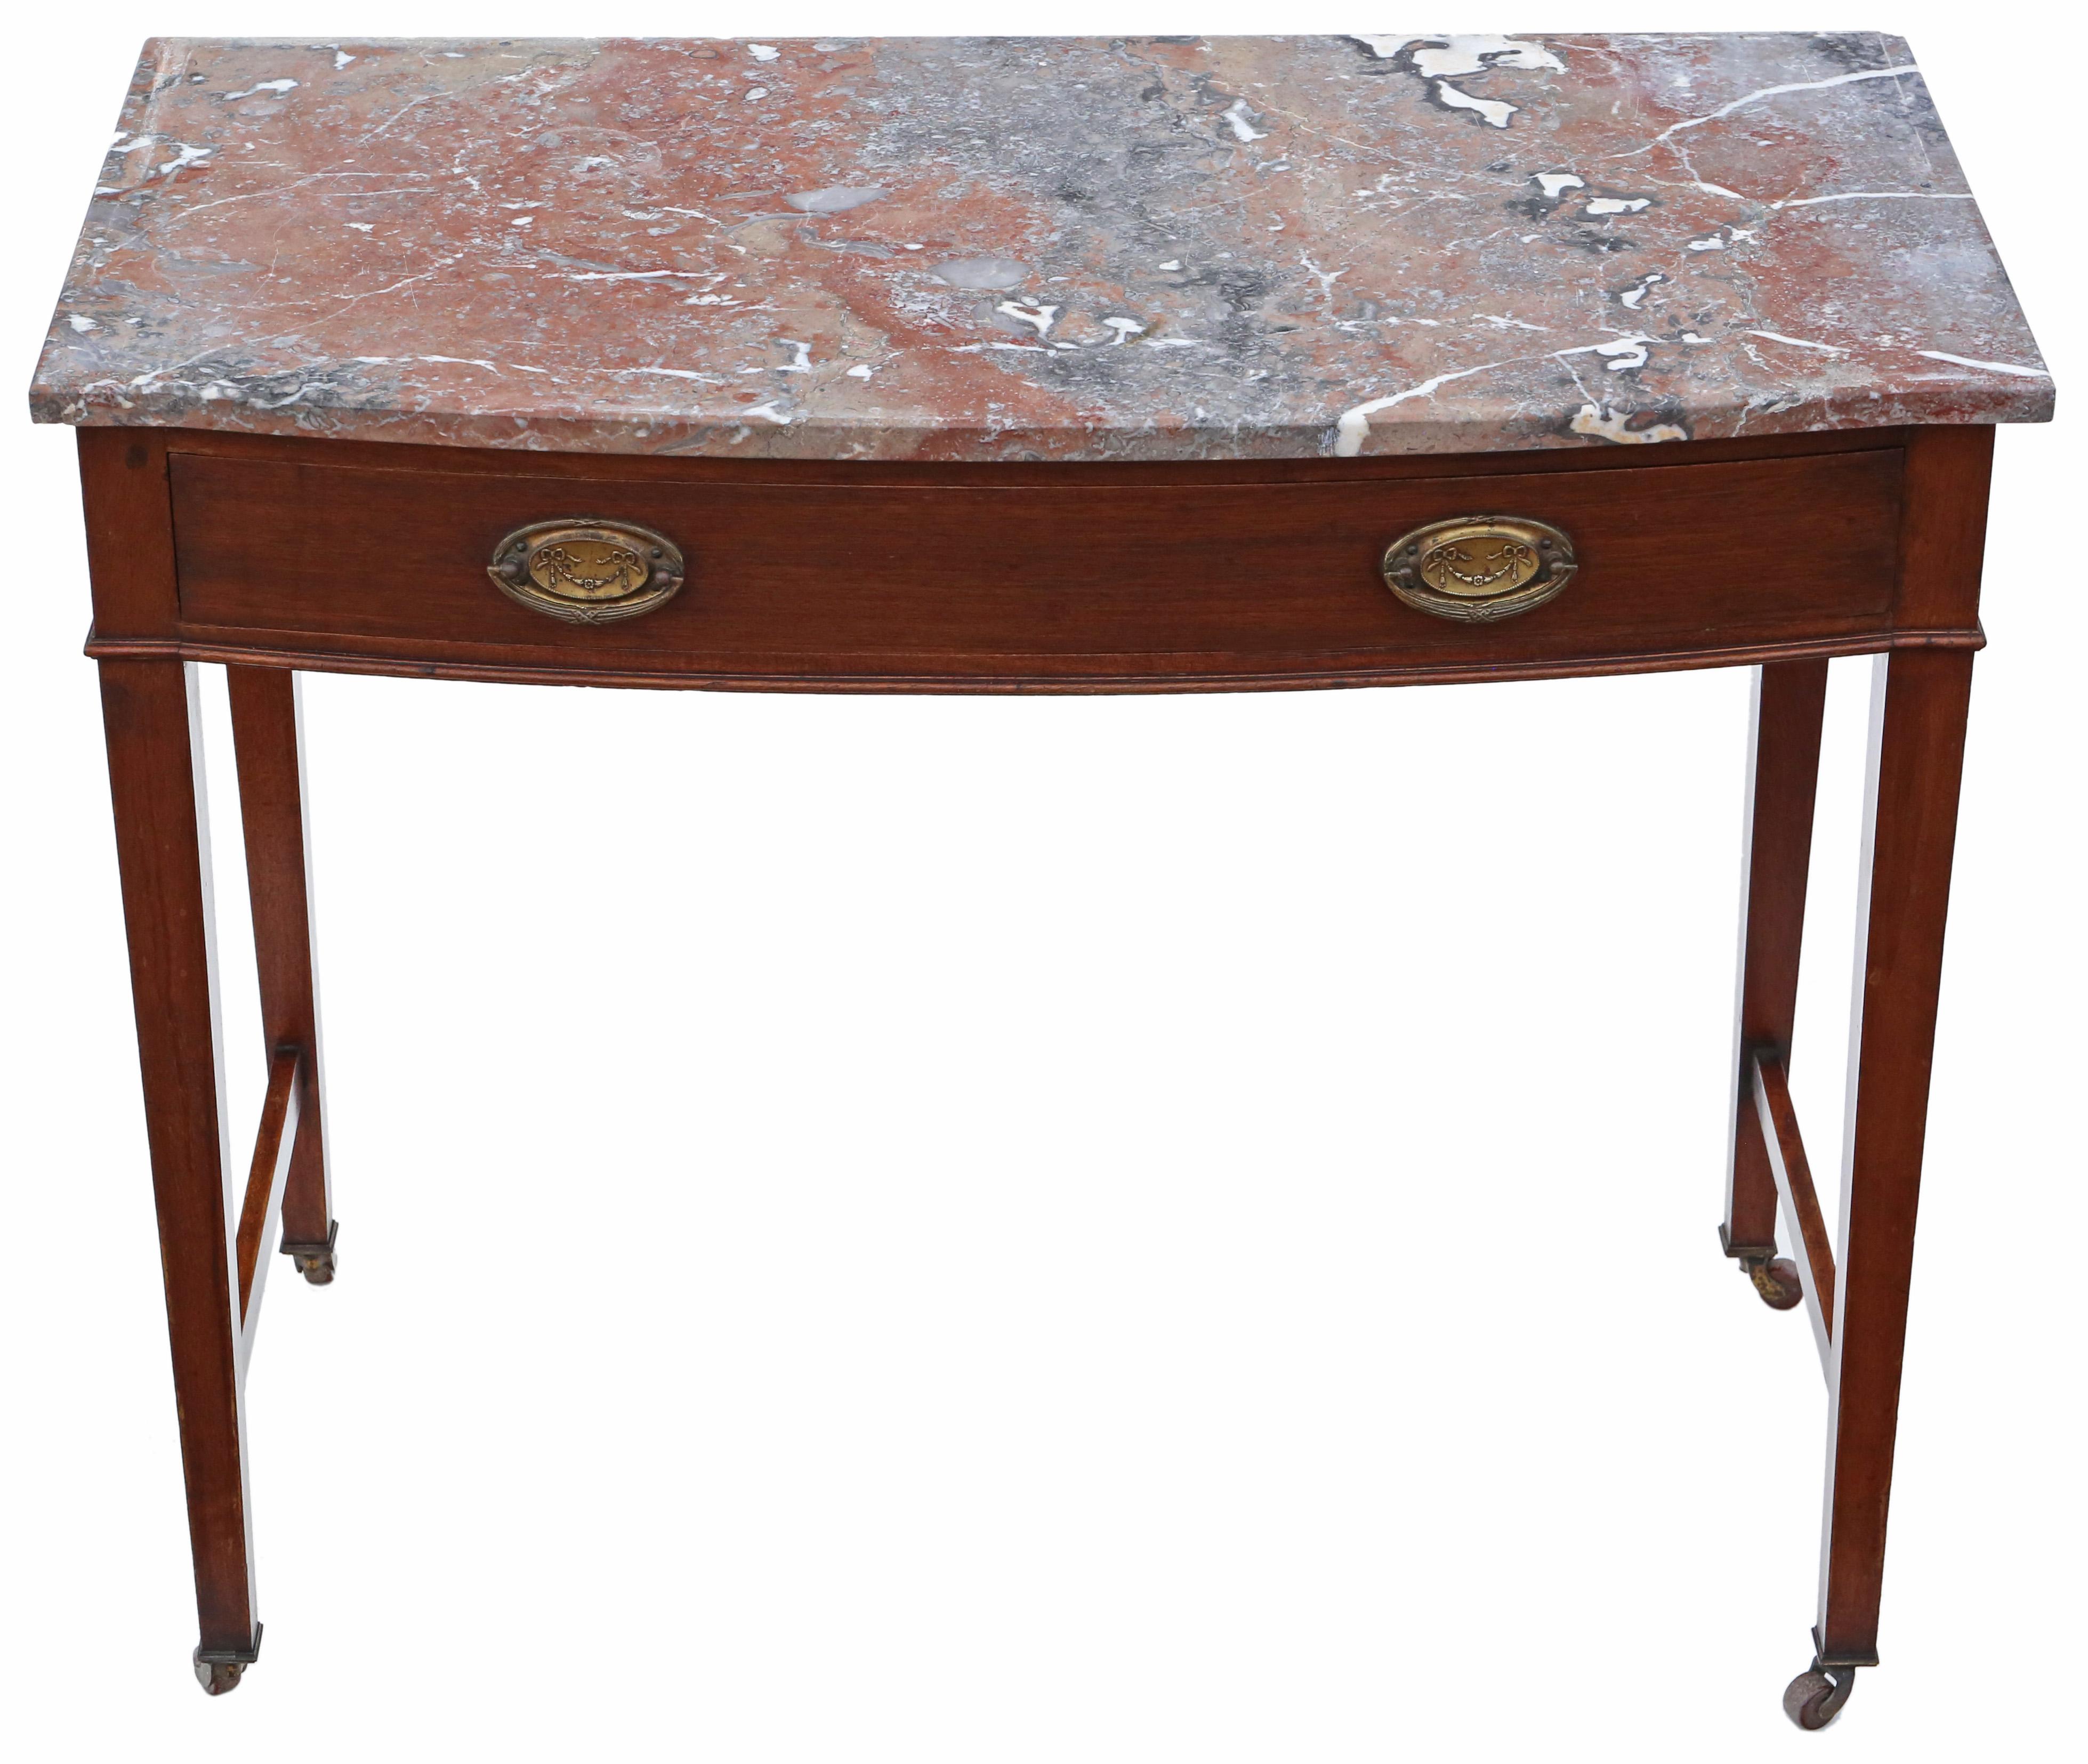 Antique quality C1900 mahogany marble writing side dressing table desk washstand. Lovely age colour and patina.

No loose joints or woodworm. Full of age, character and charm. There is a mahogany lined drawer to the front that slides freely.

Would